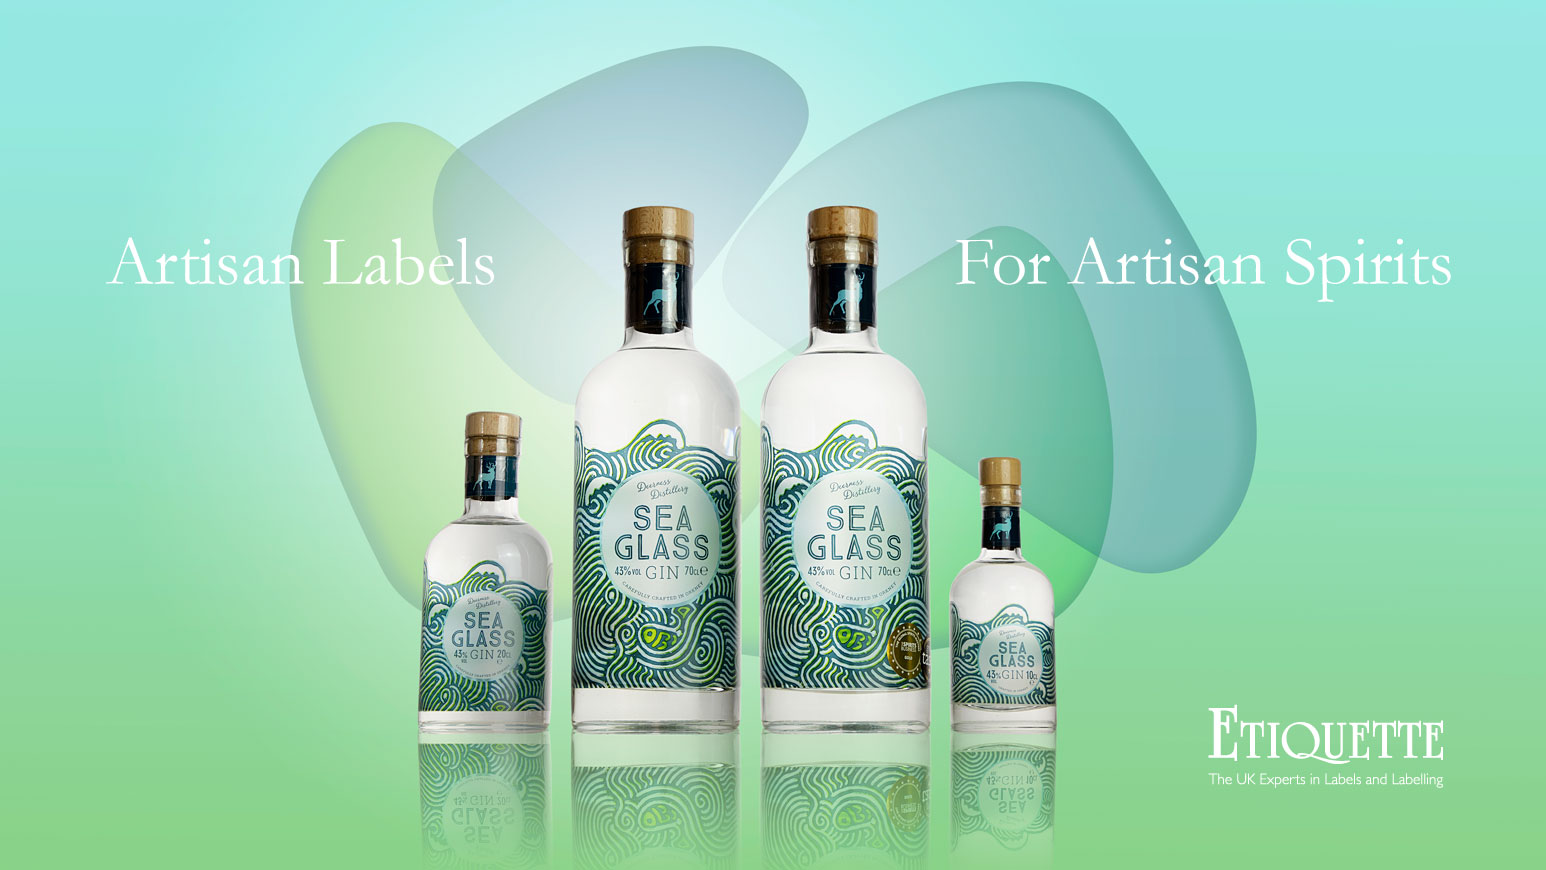 Sea Glass Gin Labels - clear synthetic material with matt finish, produced by Etiquette Labels, UK Experts in Labels and Labelling